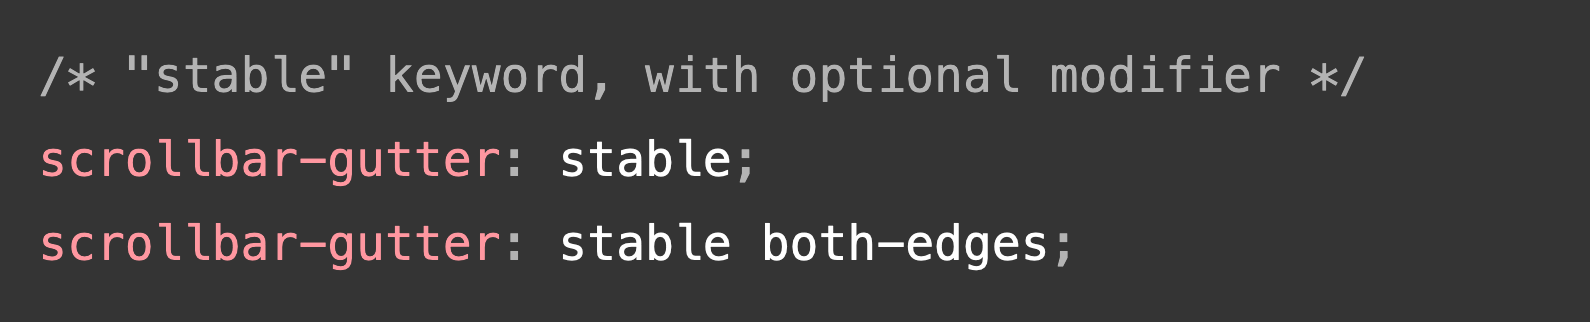 /* "stable" keyword, with optional modifier */ scrollbar-gutter: stable; scrollbar-gutter: stable both-edges;